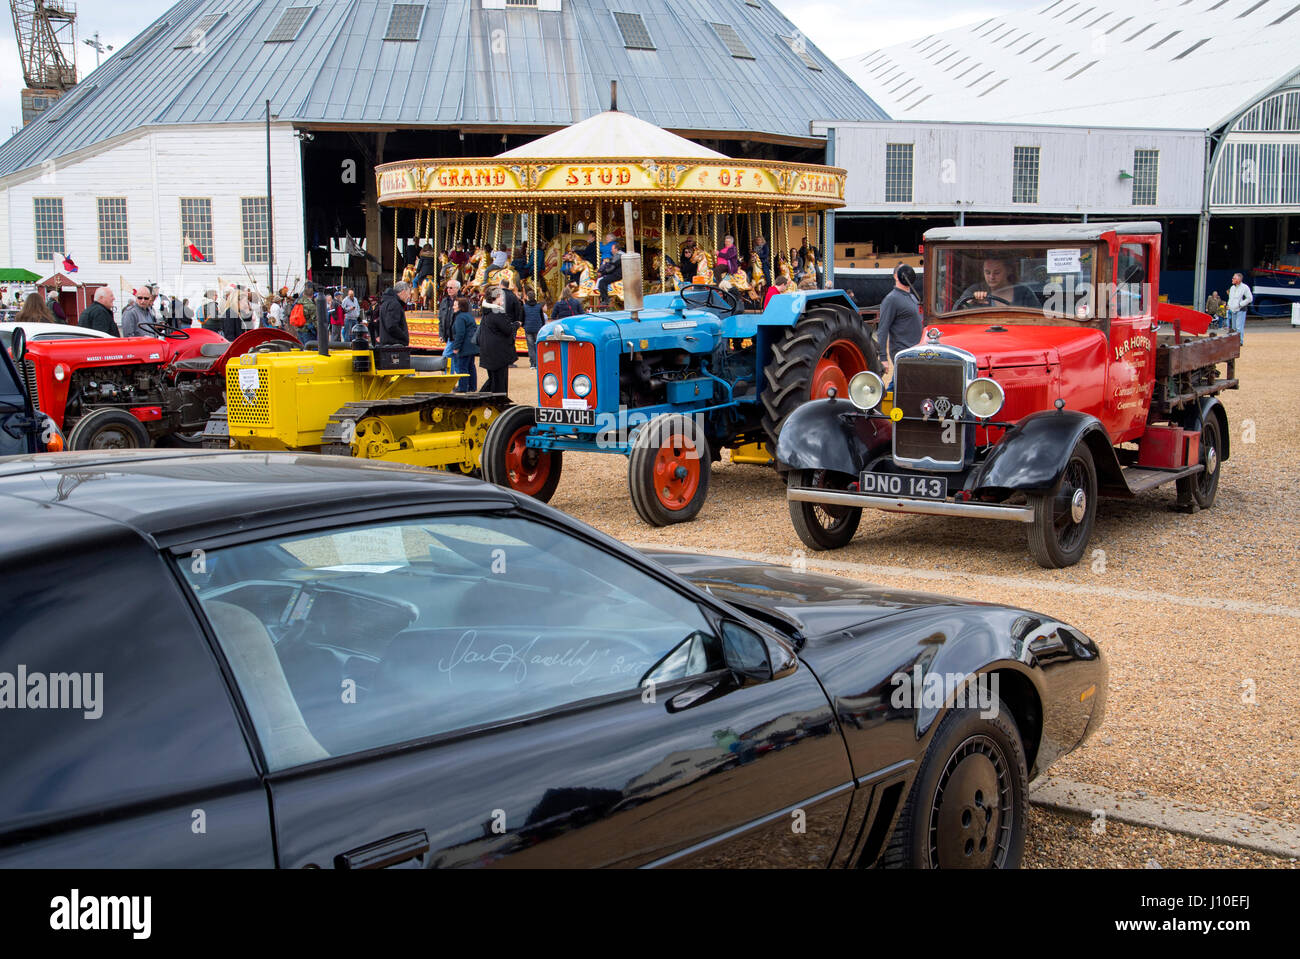 Chatham, Kent, UK. 16 April 2017. Hundreds of families came to see classic and vintage cars, trucks, steam engines and commerical vehicles and to ride vintage fairground attractions gathered at Chatham Historic Dockyard in Kent for the festival of Transport over the Easter weekend. Credit: Matthew Richardson/Alamy Live News Stock Photo